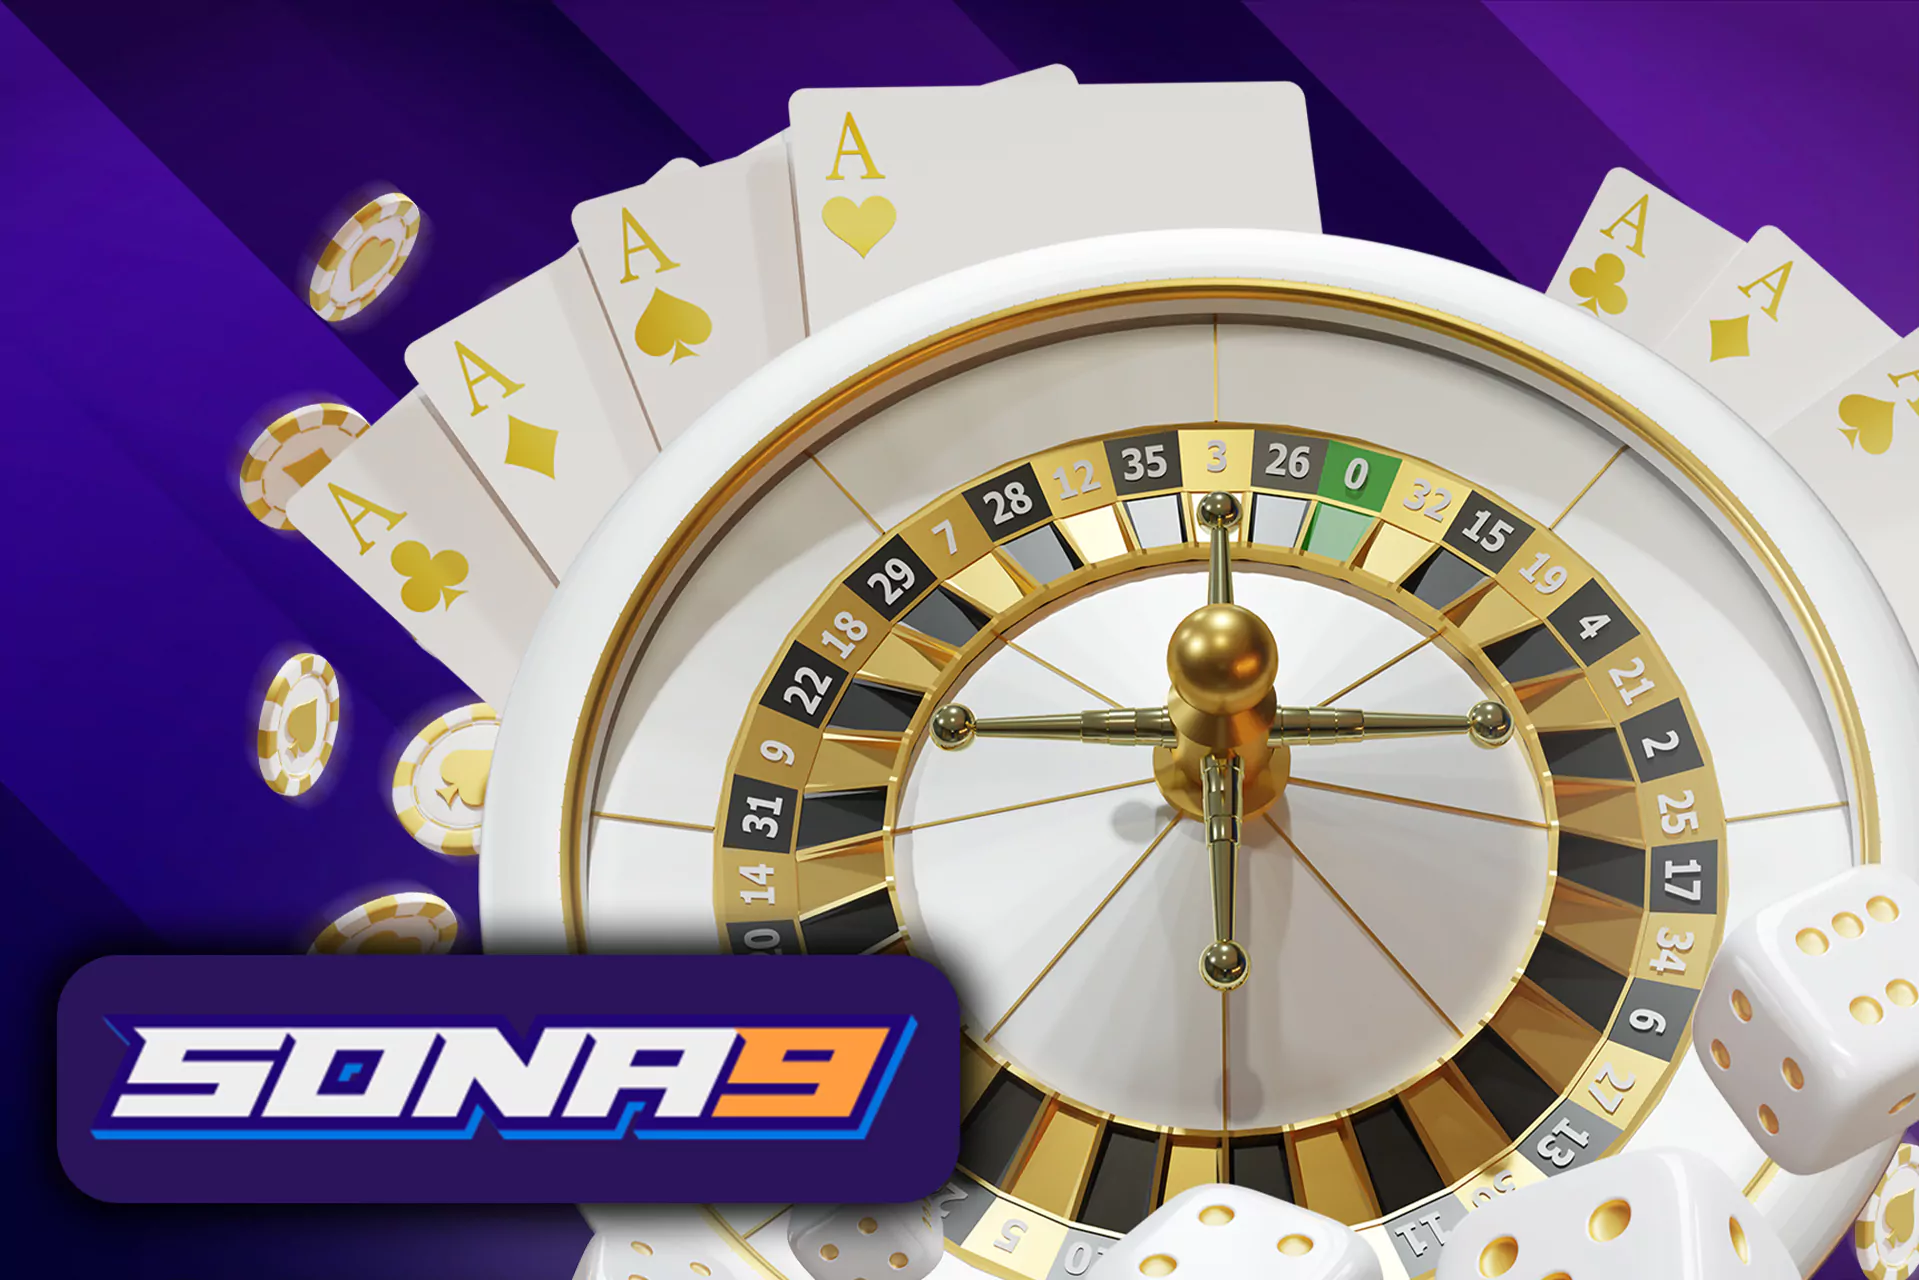 Roulette is one of the most popular casino game to play at Sona9.